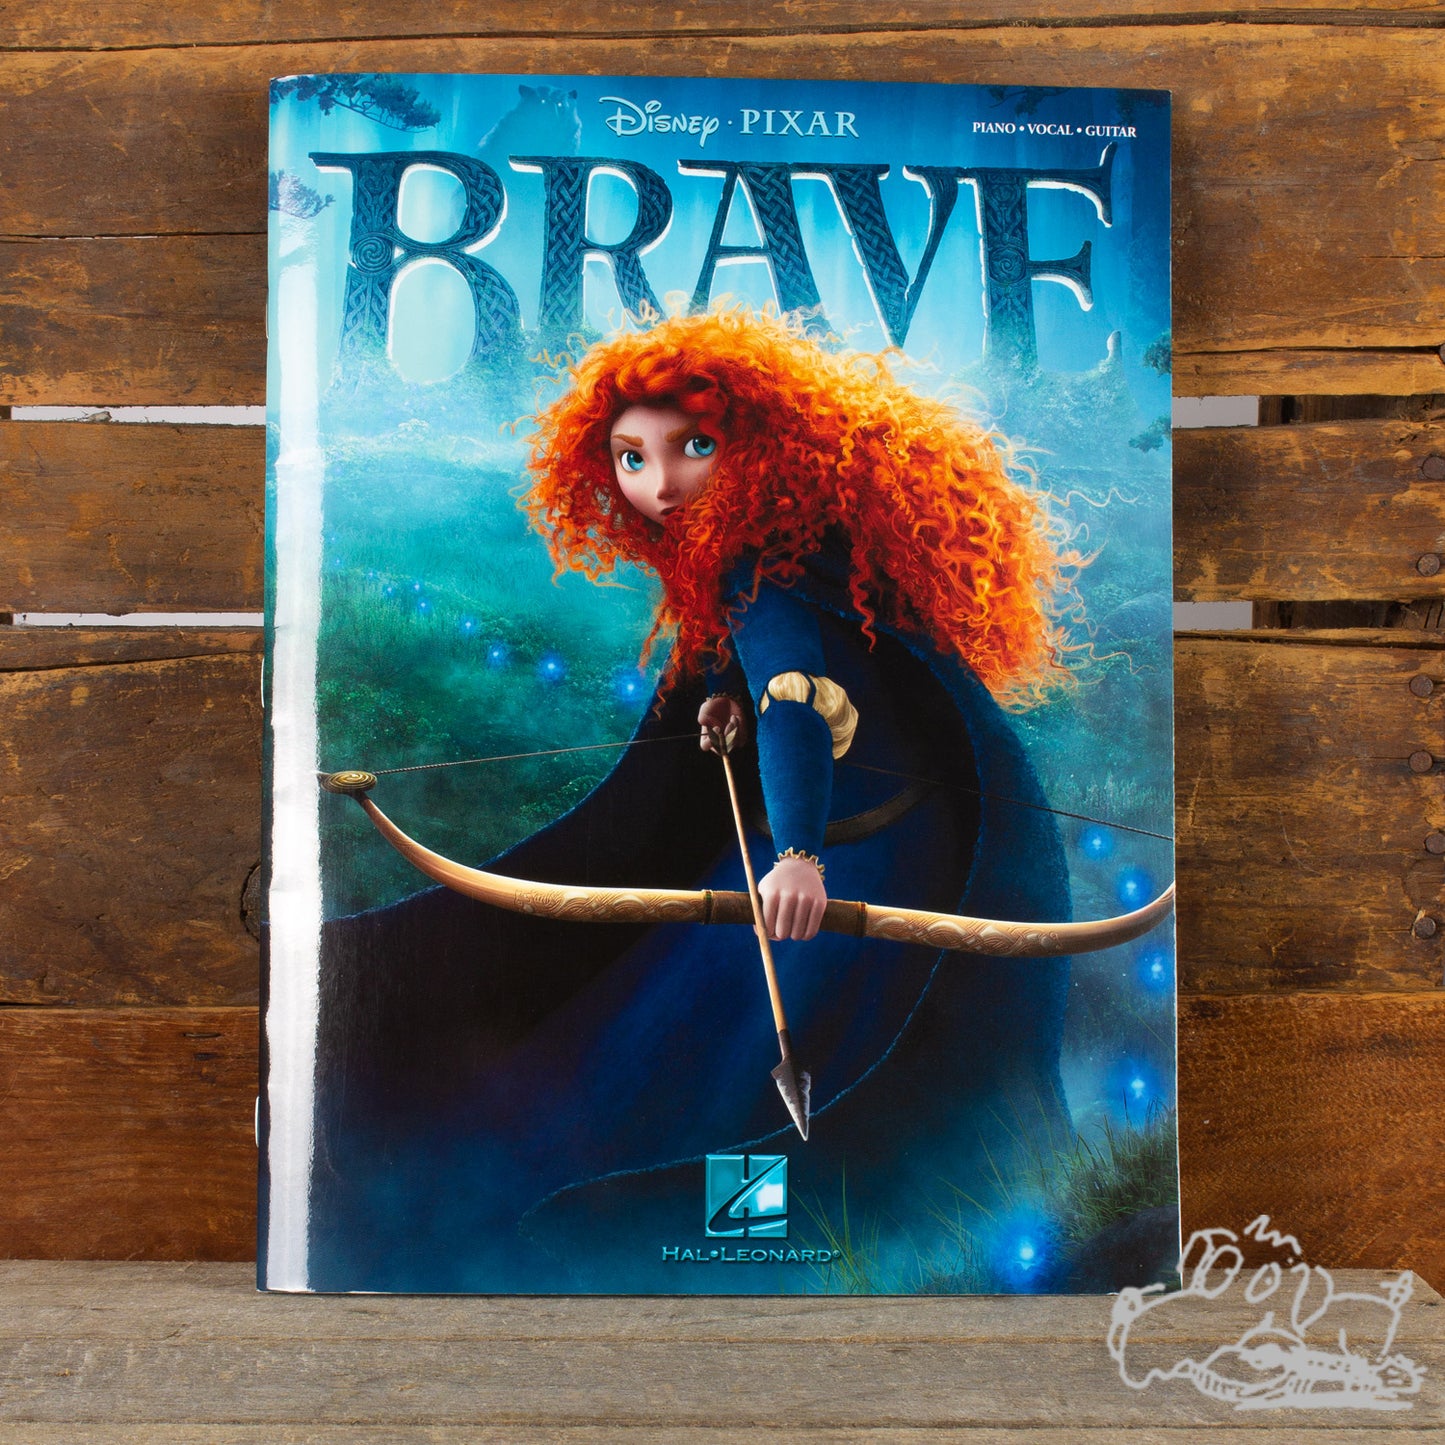 Hal Leonard Brave - Music From The Motion Picture Soundtrack Piano/Vocal/Guitar Songbook